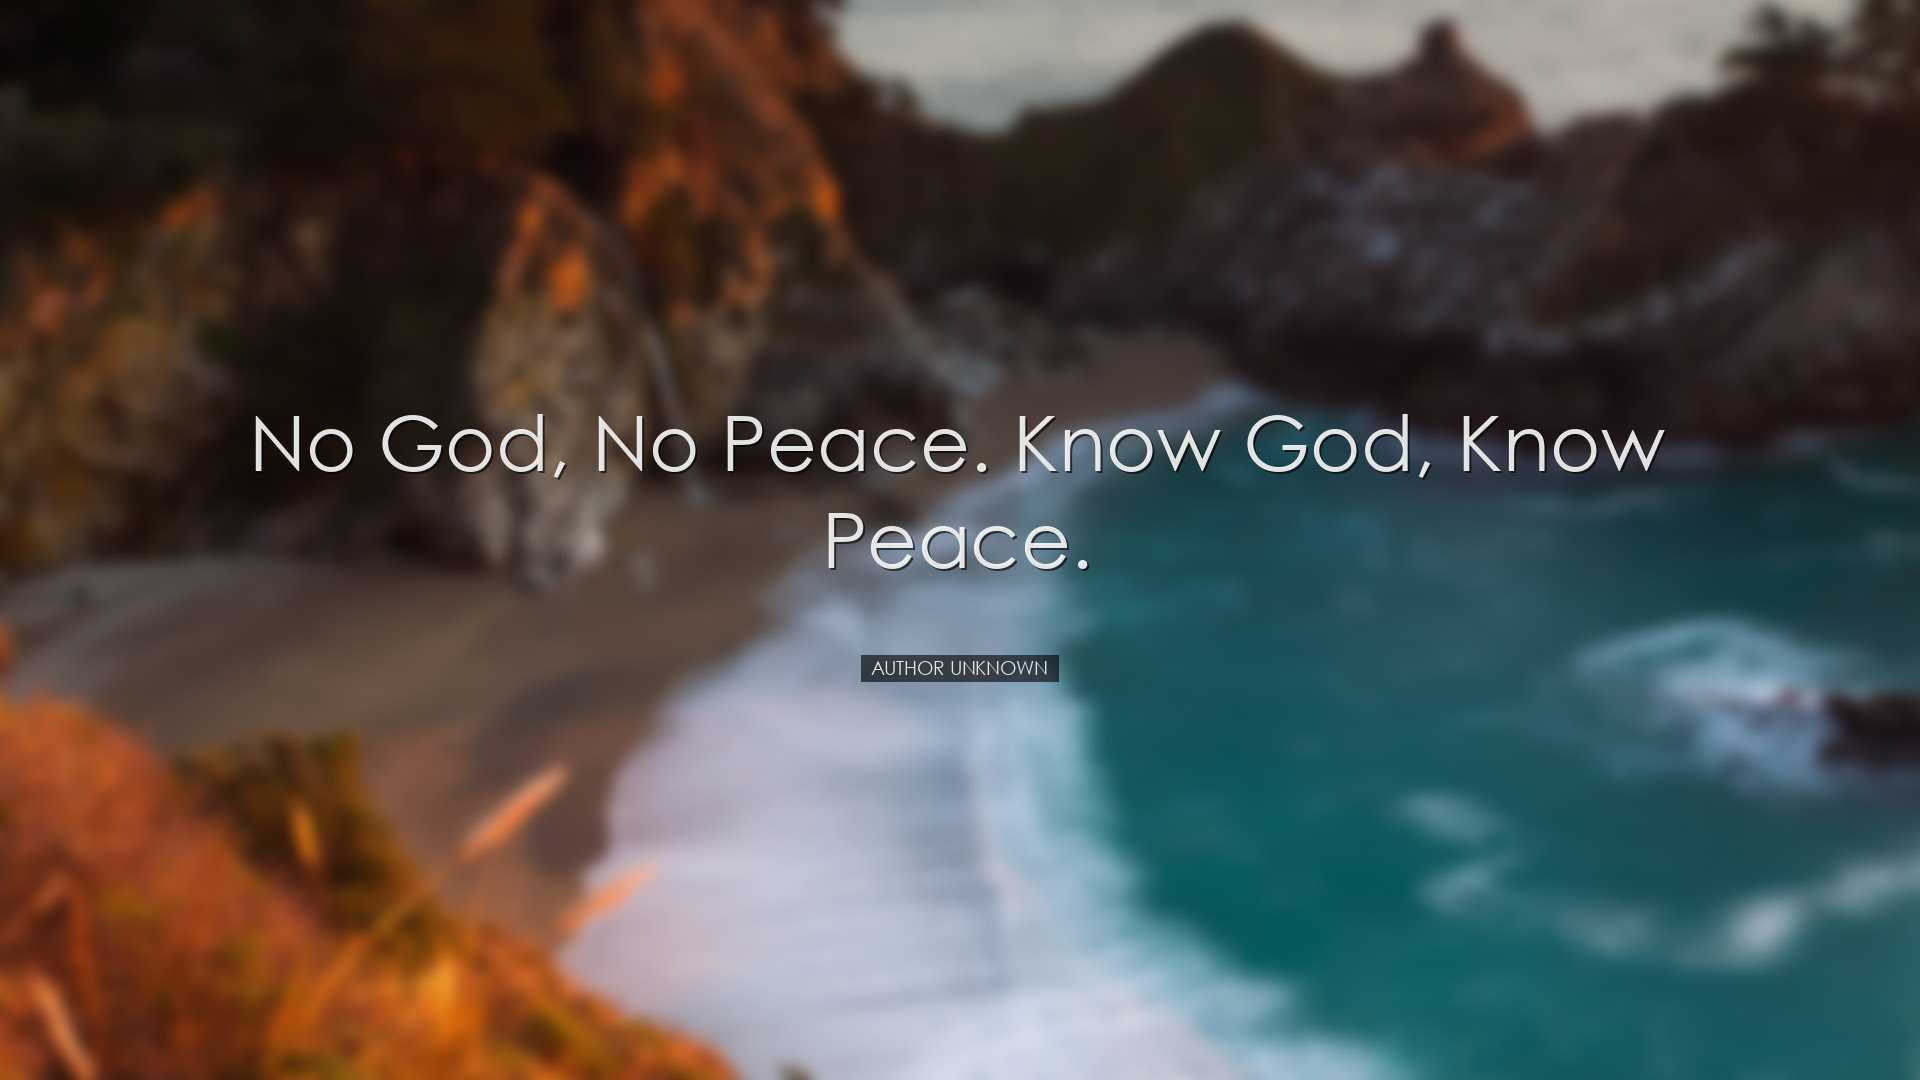 No God, no peace. Know God, know peace. - Author Unknown